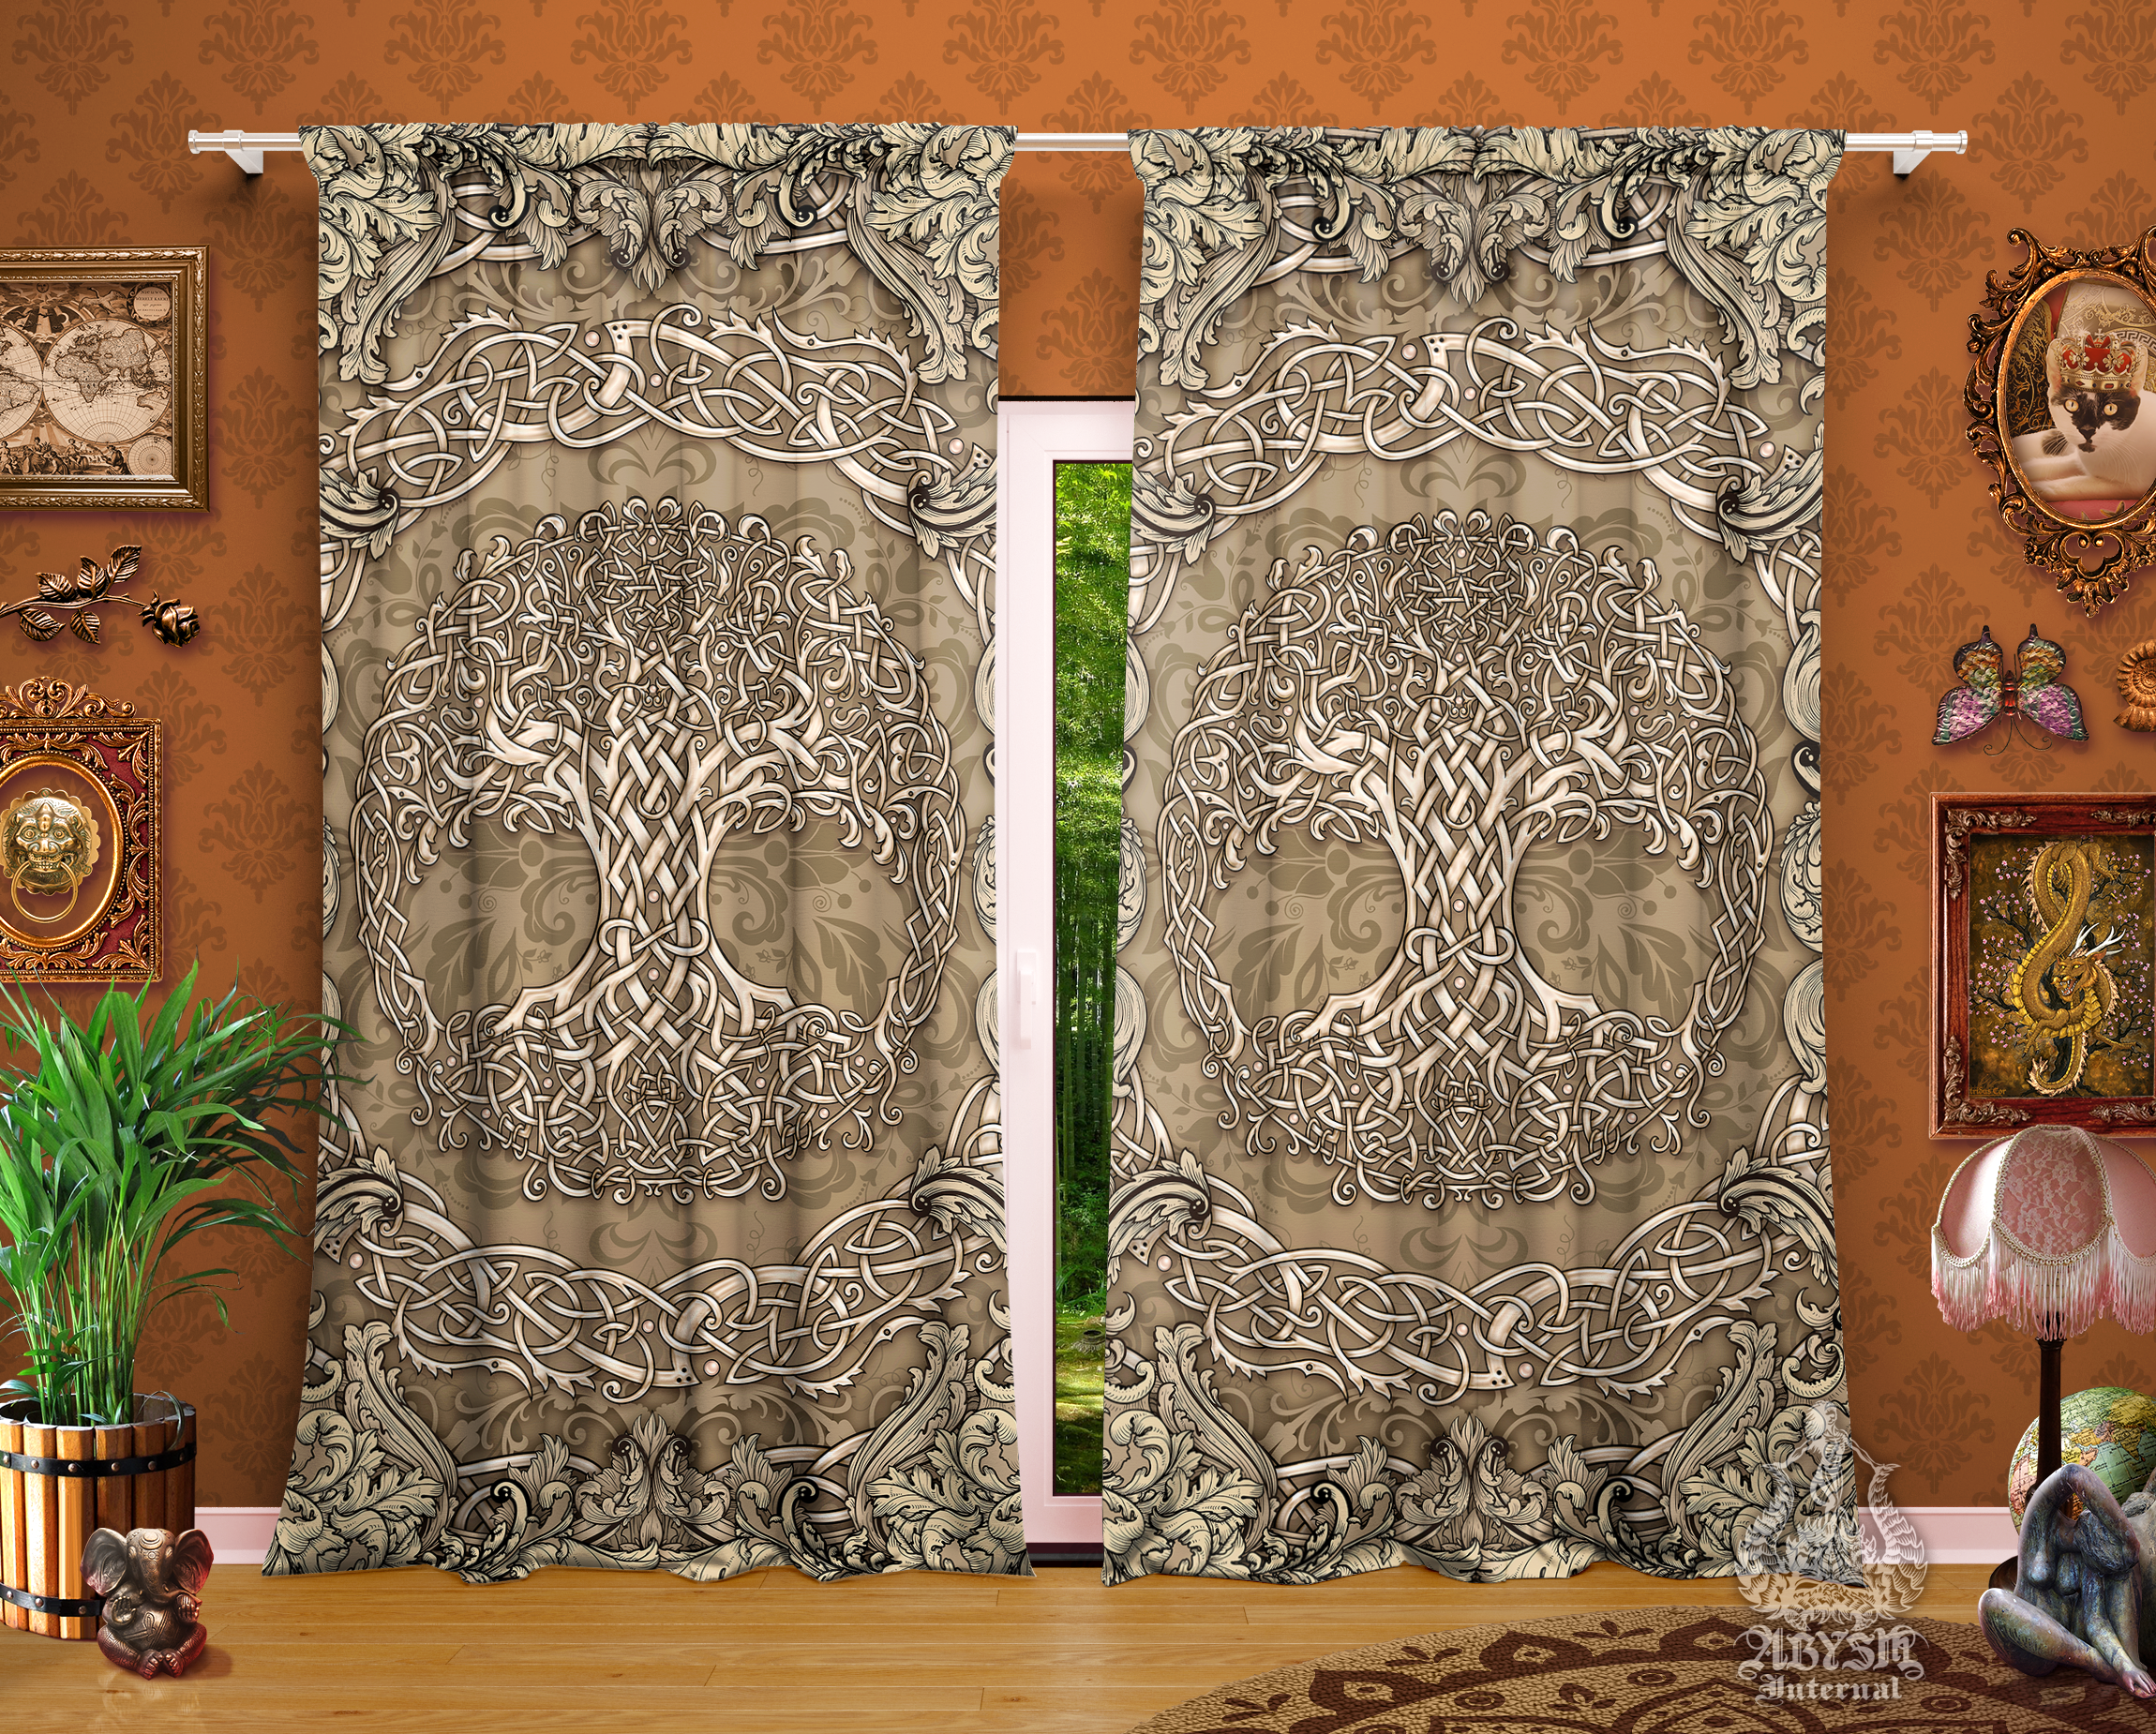 Aesthetic Celtic Curtains 50x84 Printed Window Panels Tree Of Life Pagan Room Decor Beige Art Print Funky And Eclectic Home Cream Abysm Internal